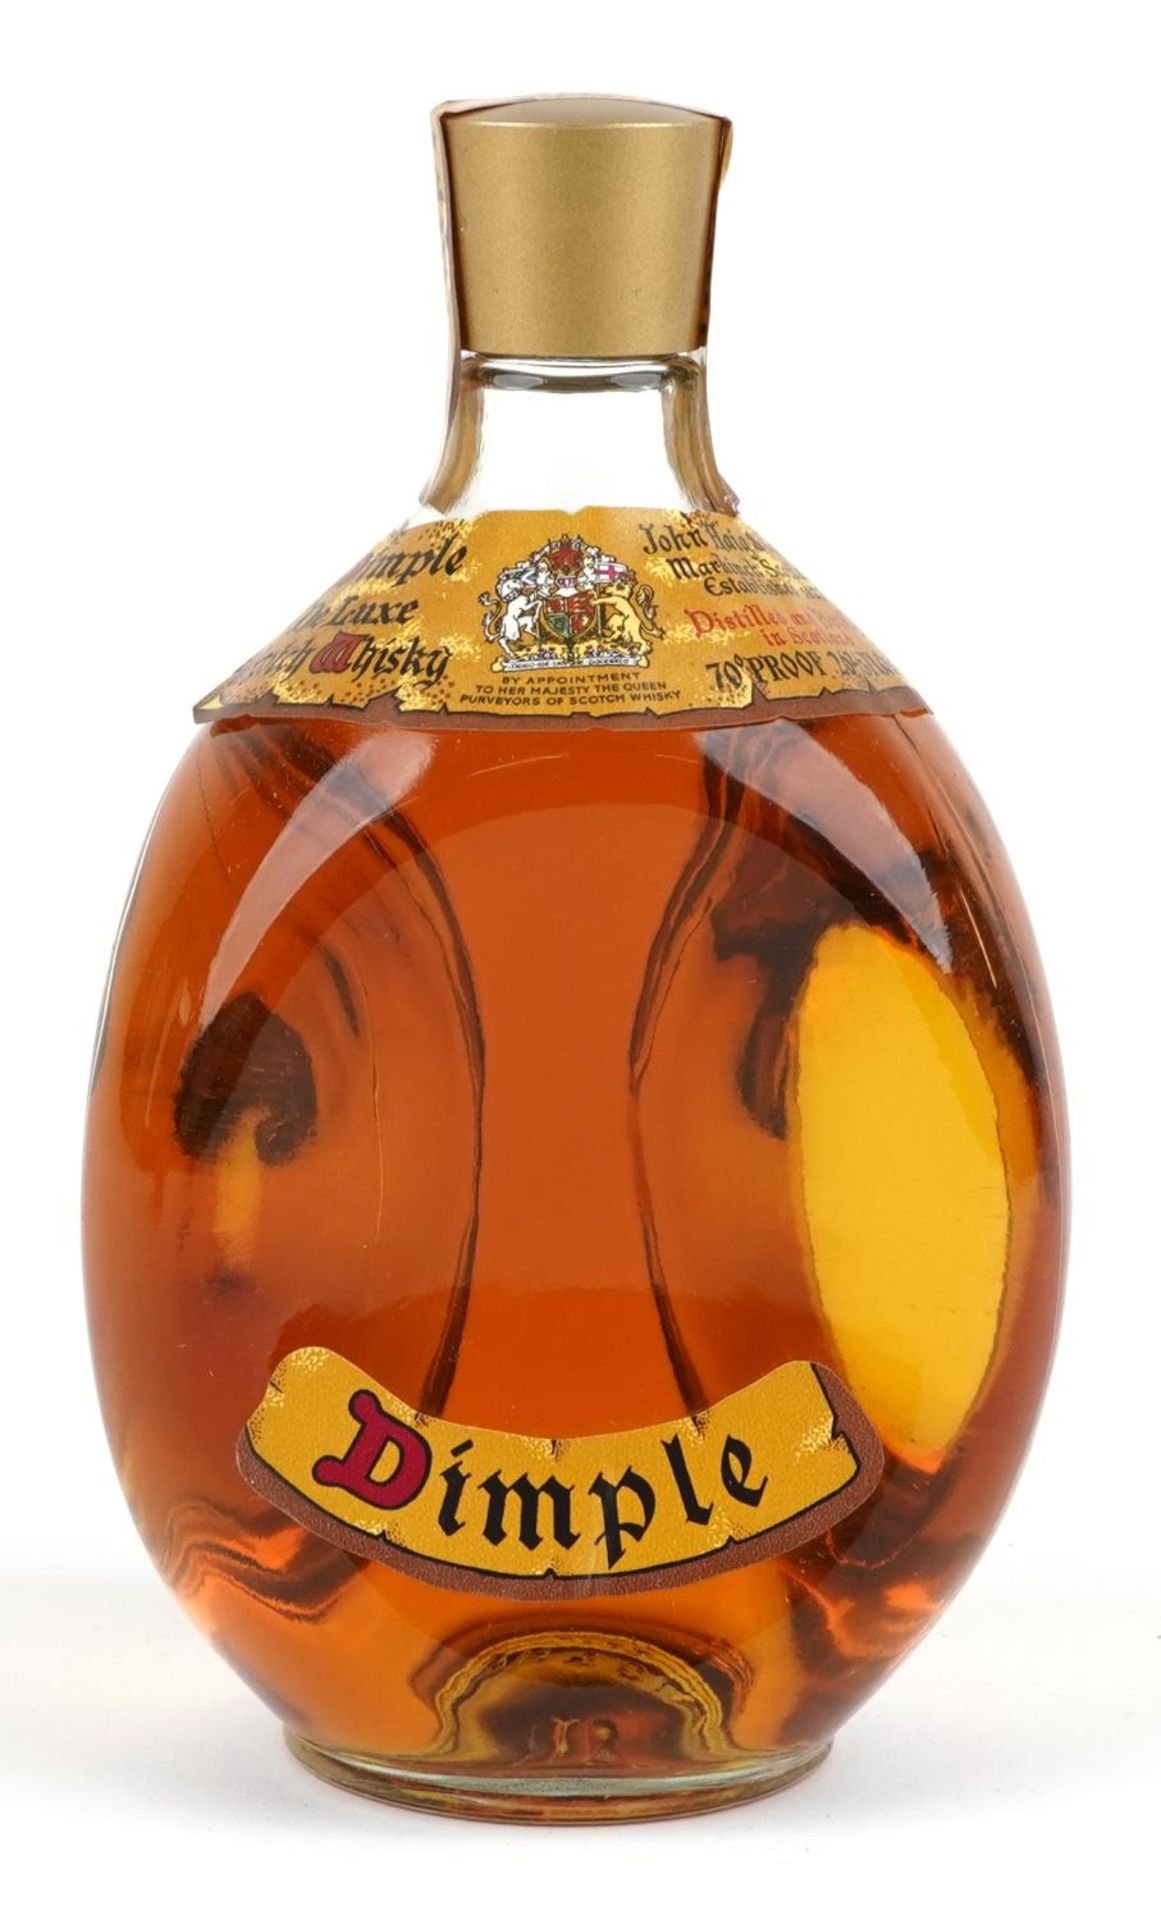 Bottle of Dimple Deluxe Scotch Whisky with box - Bild 2 aus 3